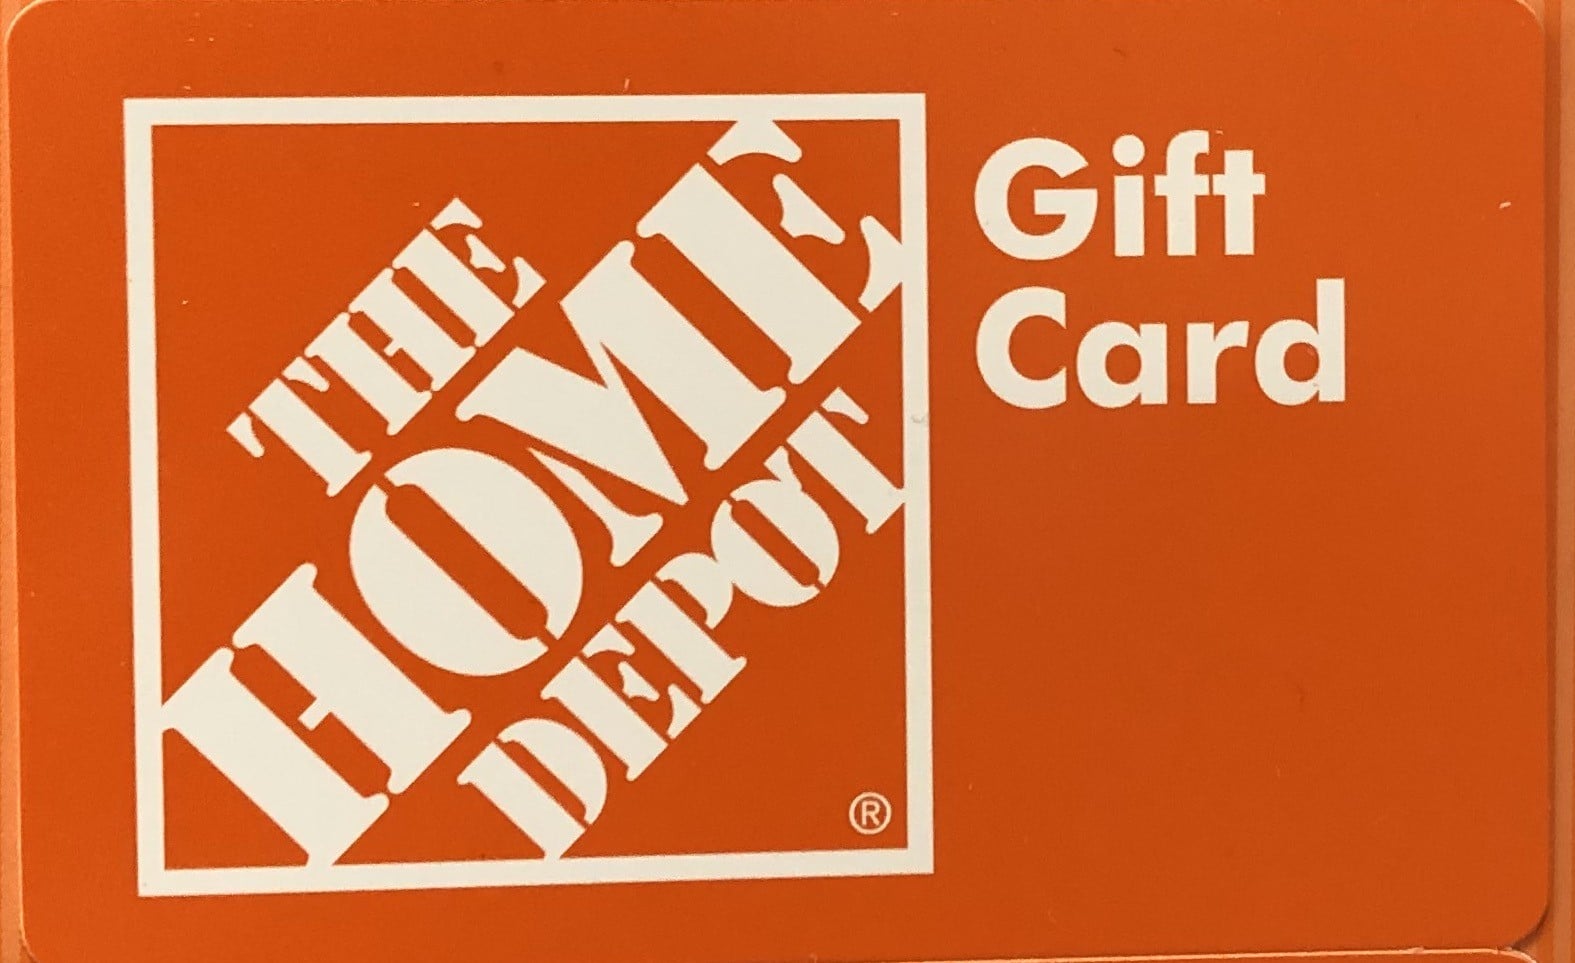 Home Depot Canada Mission, Benefits, and Work Culture